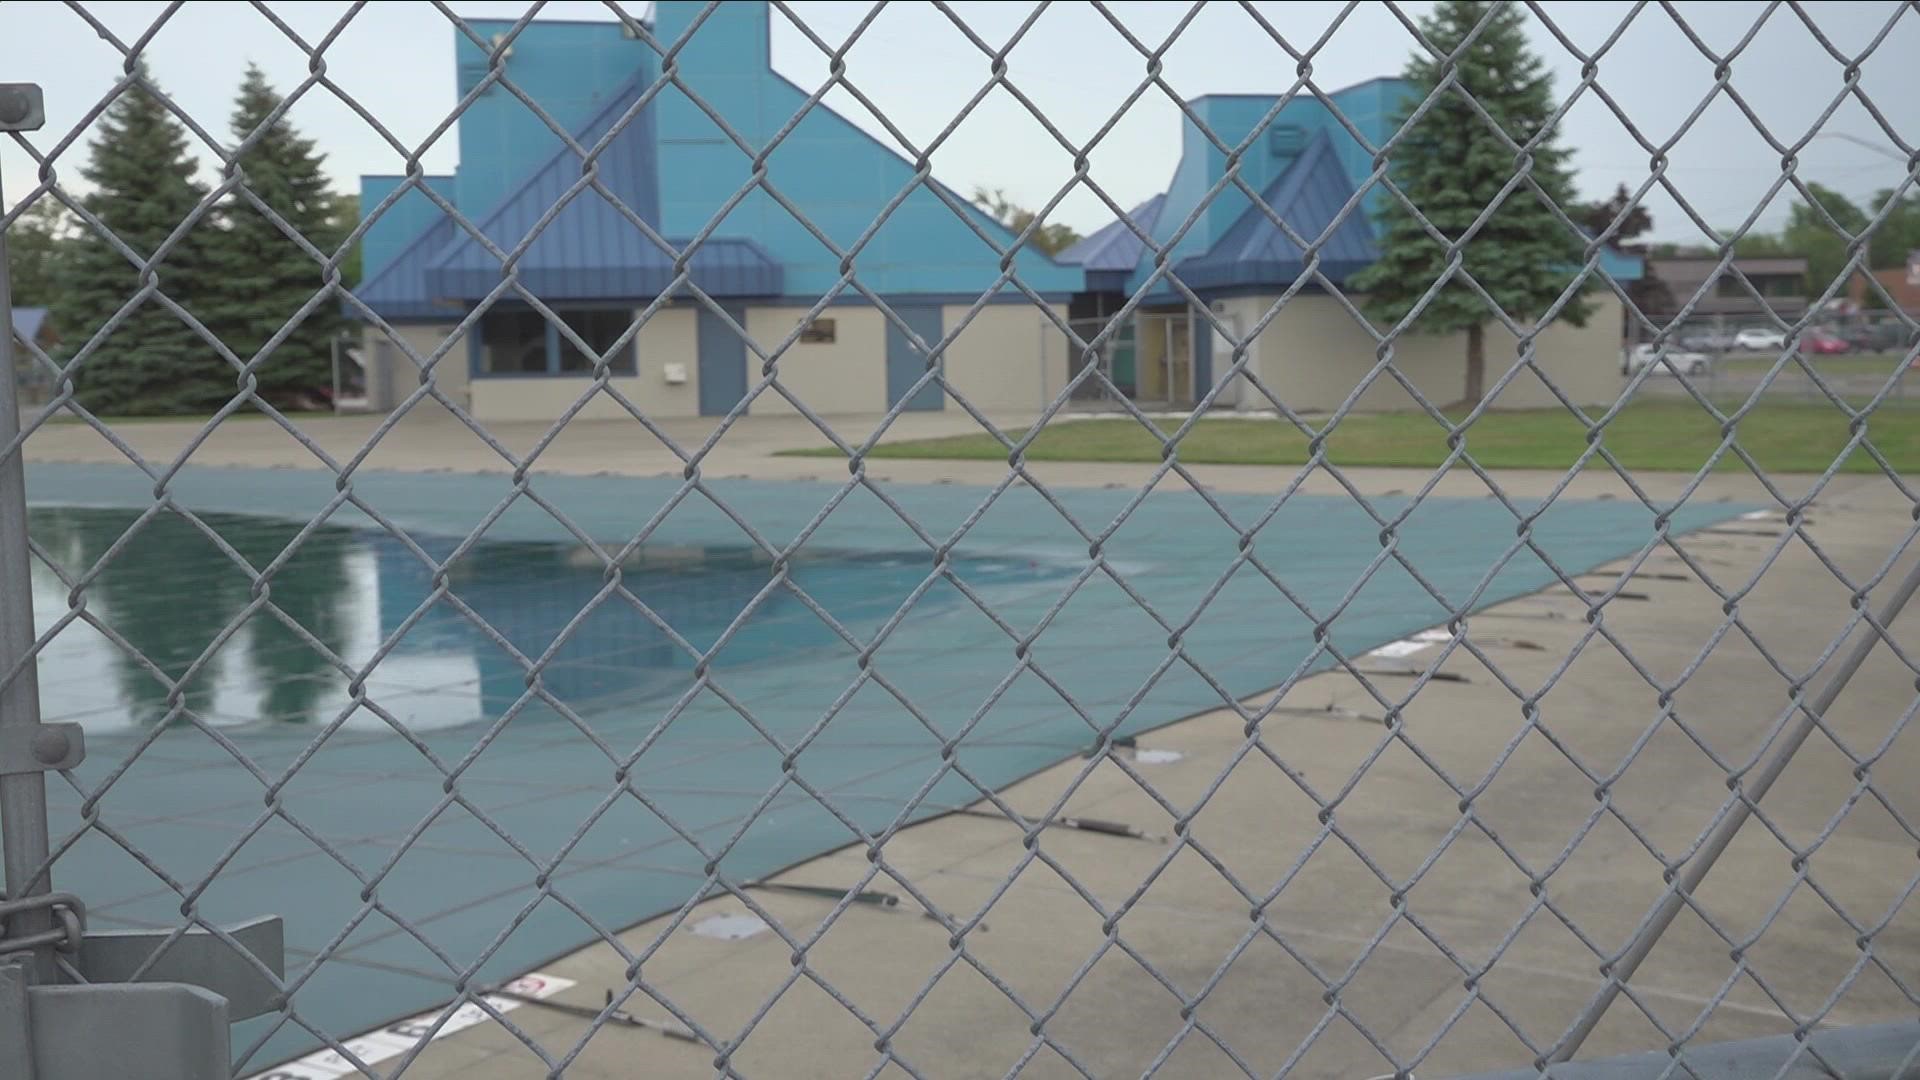 Town supervisor Gary Dickson held a board meeting tonight to decide the future of plans for the pool and the potential of using the space for something else.